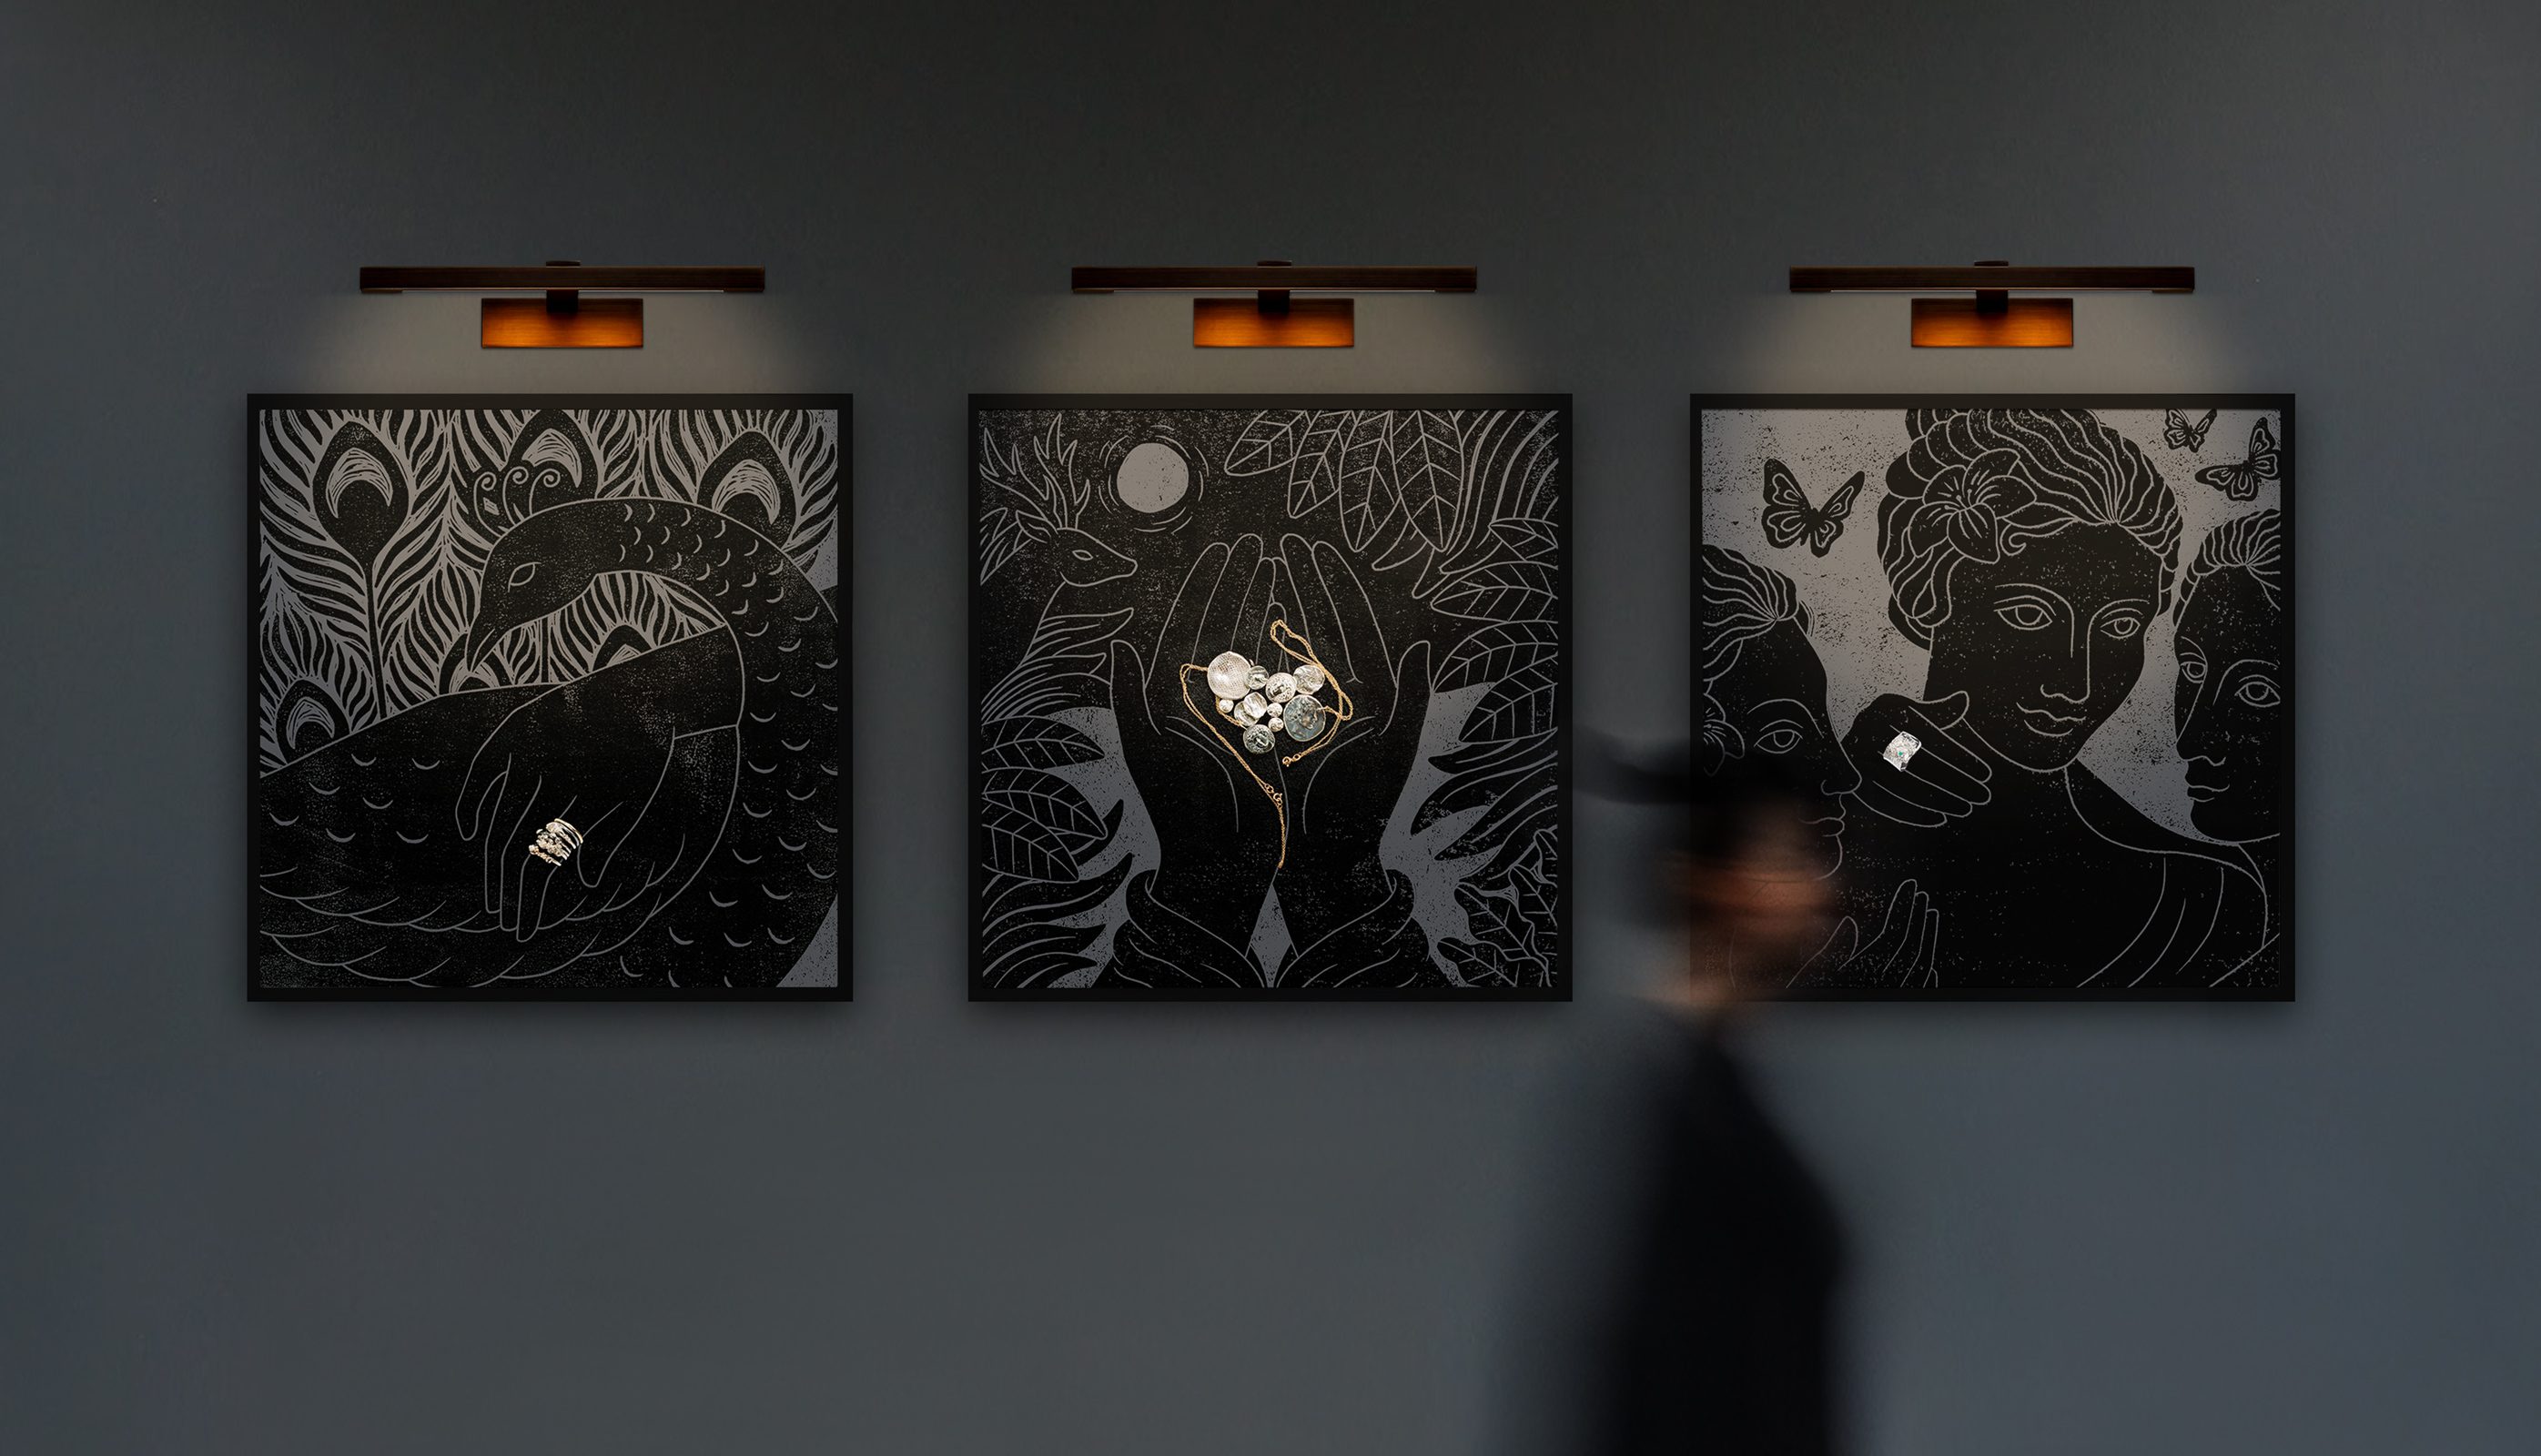 Three framed illustrations on a dark wall depicting mythical scenes that interact with photography of silver jewellery